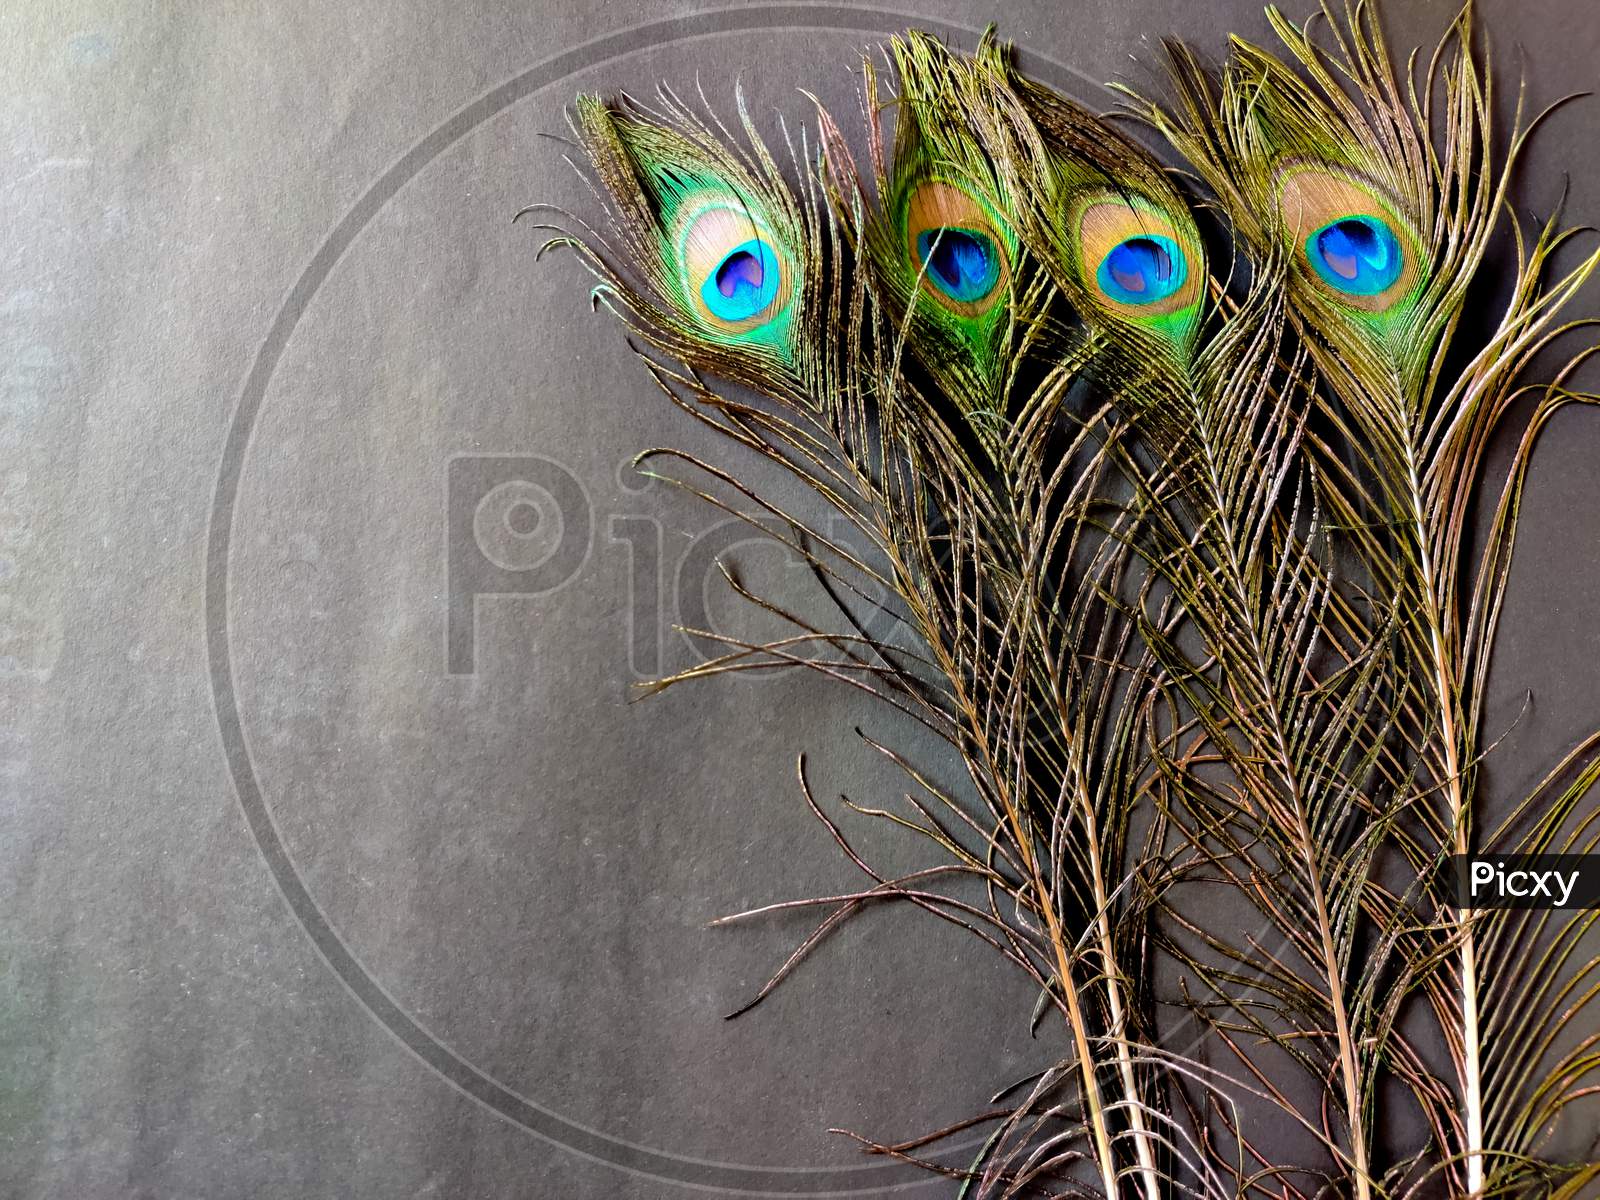 Four Full Sized Elegant Peacock Feathers Isolated On Black Background. Copy Space